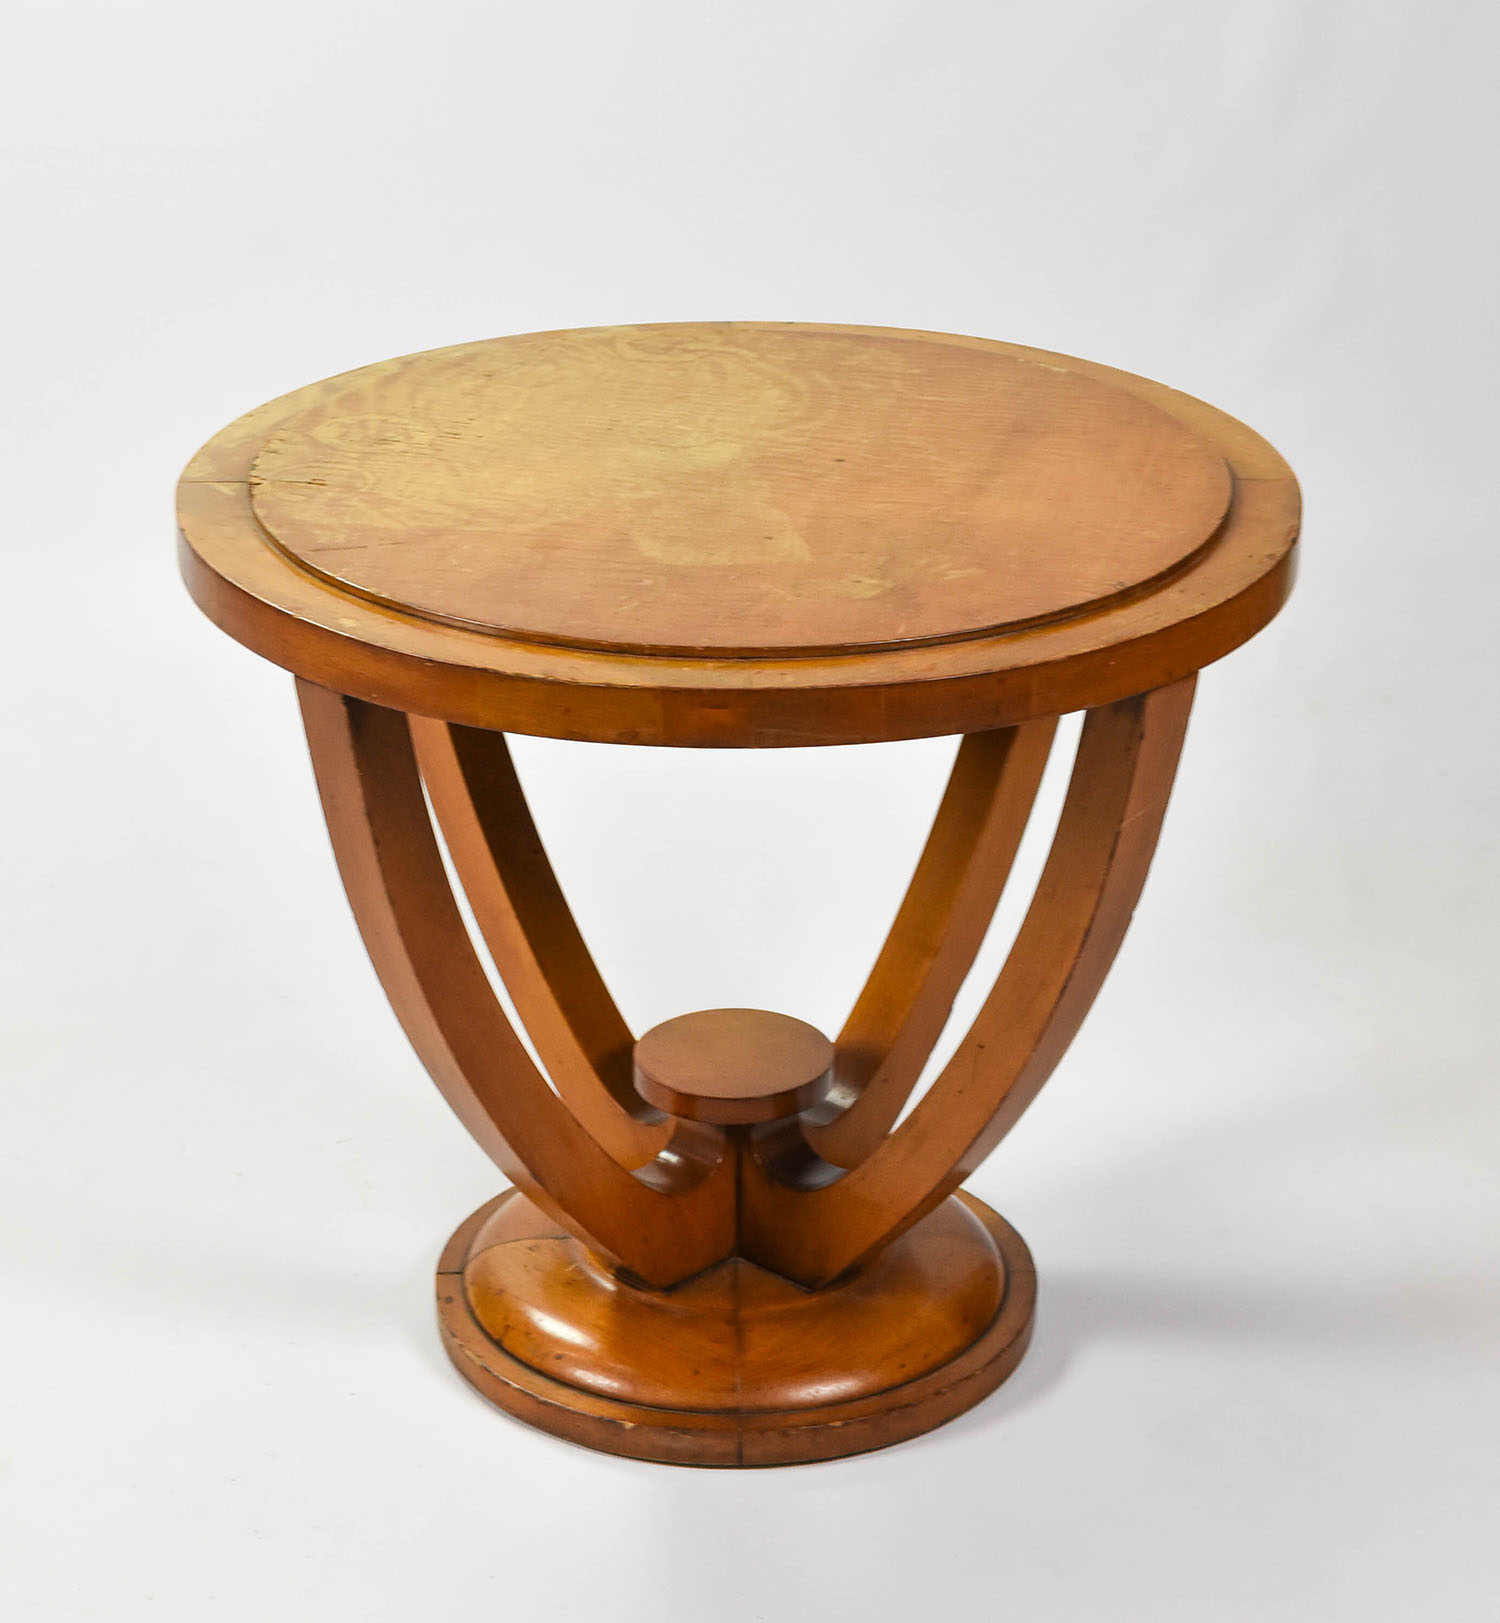 1930s Stepped Art Deco Round Wood Side Table